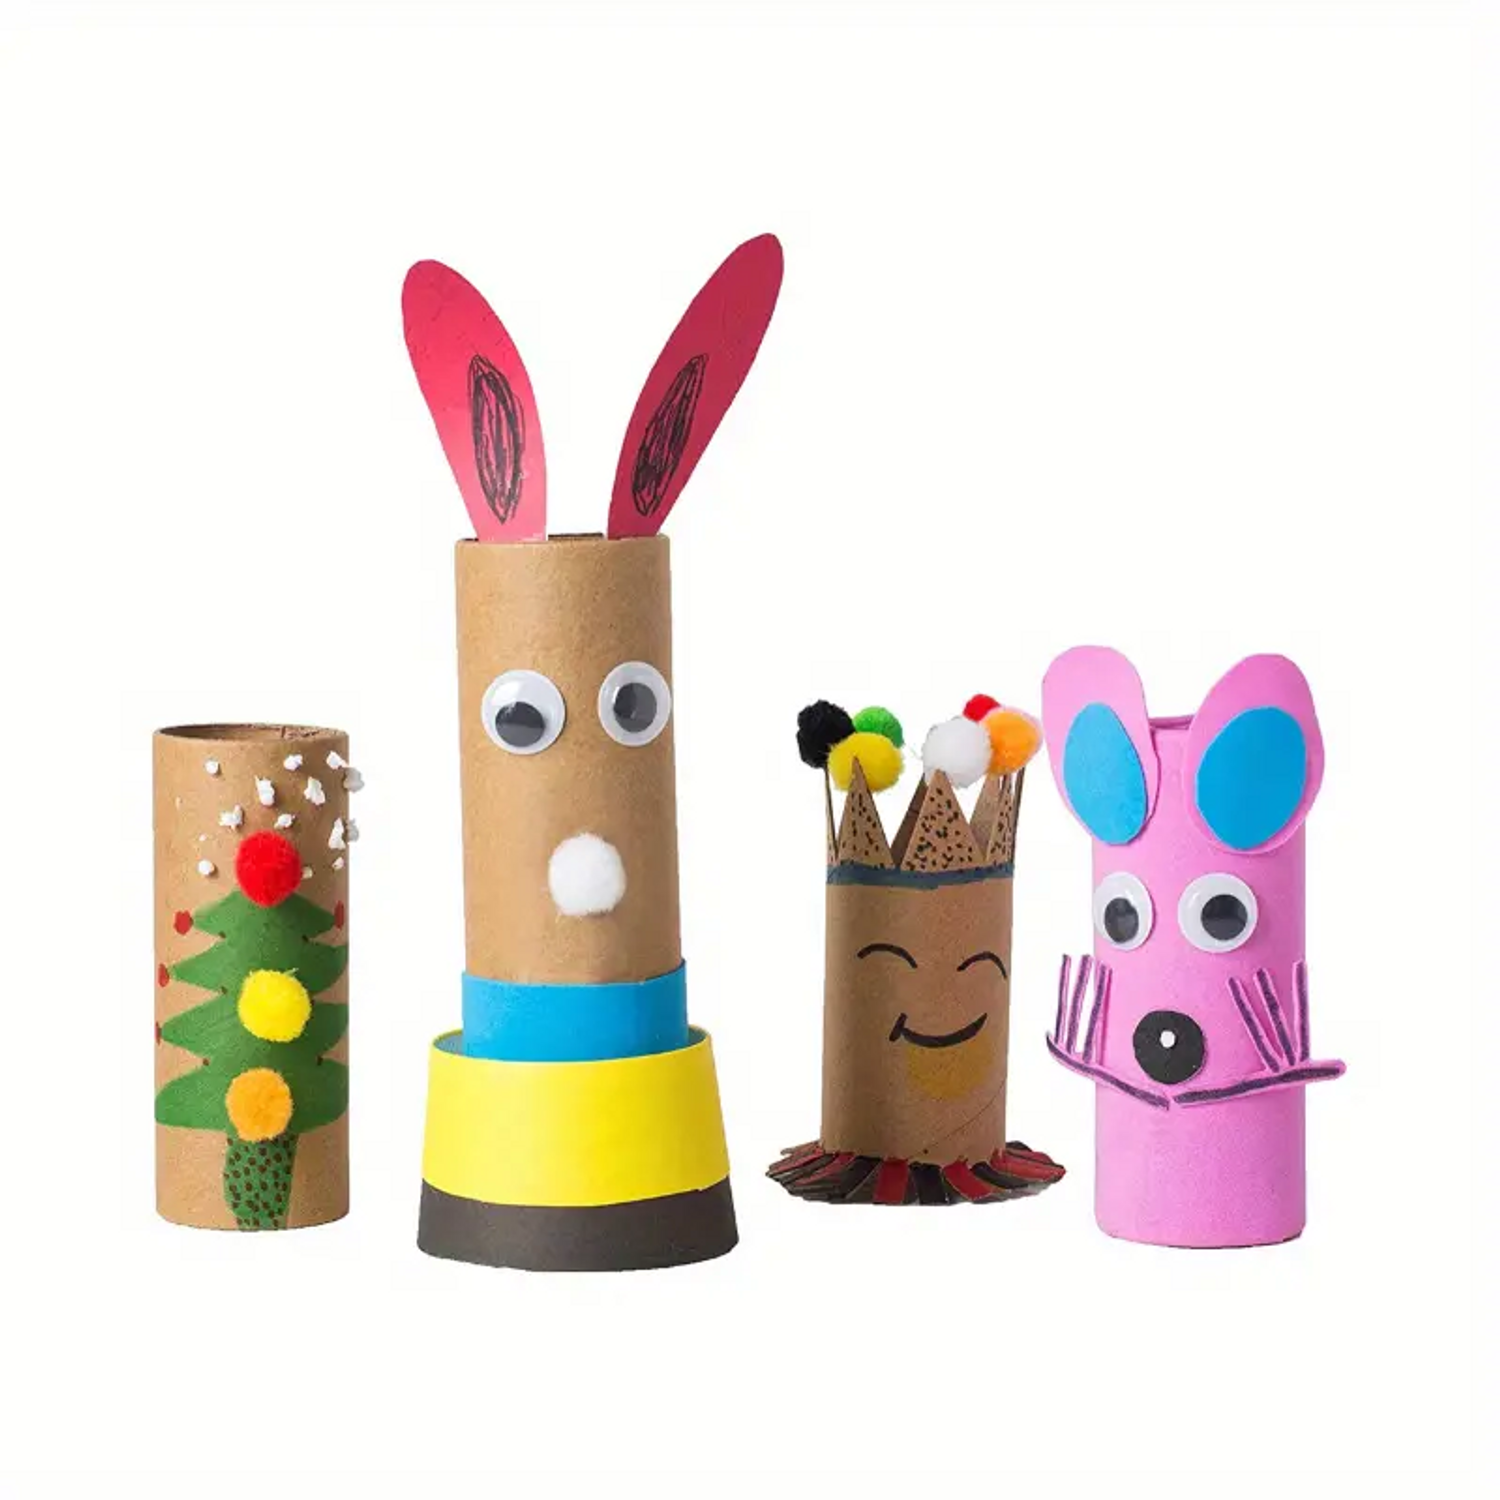 DIY Crafting Brown Cardboard Tubes Paper For Classrooms and Art Projects